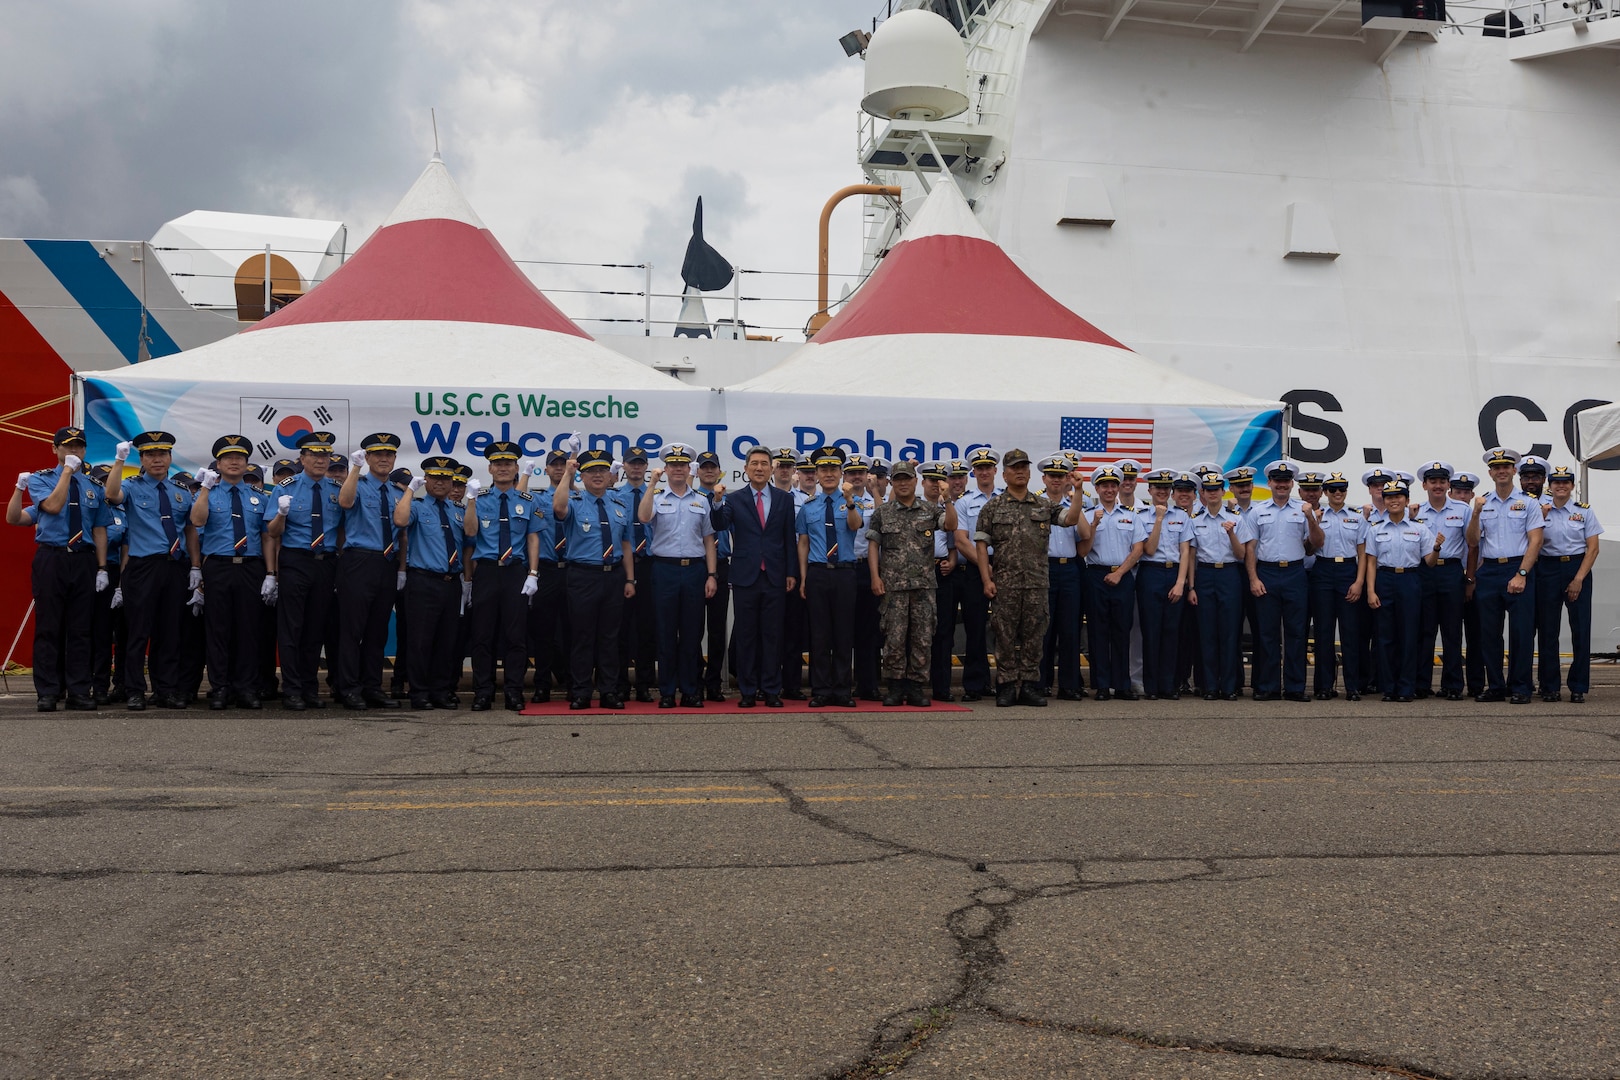 U.S. Coast Guardsmen assigned to the U.S. Coast Guard Cutter Waesche (WMSL-751), members of the Korea Coast Guard, and Lee Kang-Deok, center, mayor of Pohang, pose for a photo during a welcoming reception in Pohang, Republic of Korea, June 9, 2024. U.S. Coast Guardsmen assigned to the Waesche were greeted by members of the Korea Coast Guard upon their arrival to Pohang. Waesche is the second U.S. Coast Guard National Security Cutter deployed to the Indo-Pacific in 2024. Waesche is assigned to Destroyer Squadron (DESRON) 15, the Navy’s largest DESRON and the U.S. 7th Fleet’s principal surface force. Coast Guard cutters routinely deploy to the region to engage with partner nations to ensure a free and open Indo-Pacific. (U.S. Marine Corps photo by Cpl. Elijah Murphy)